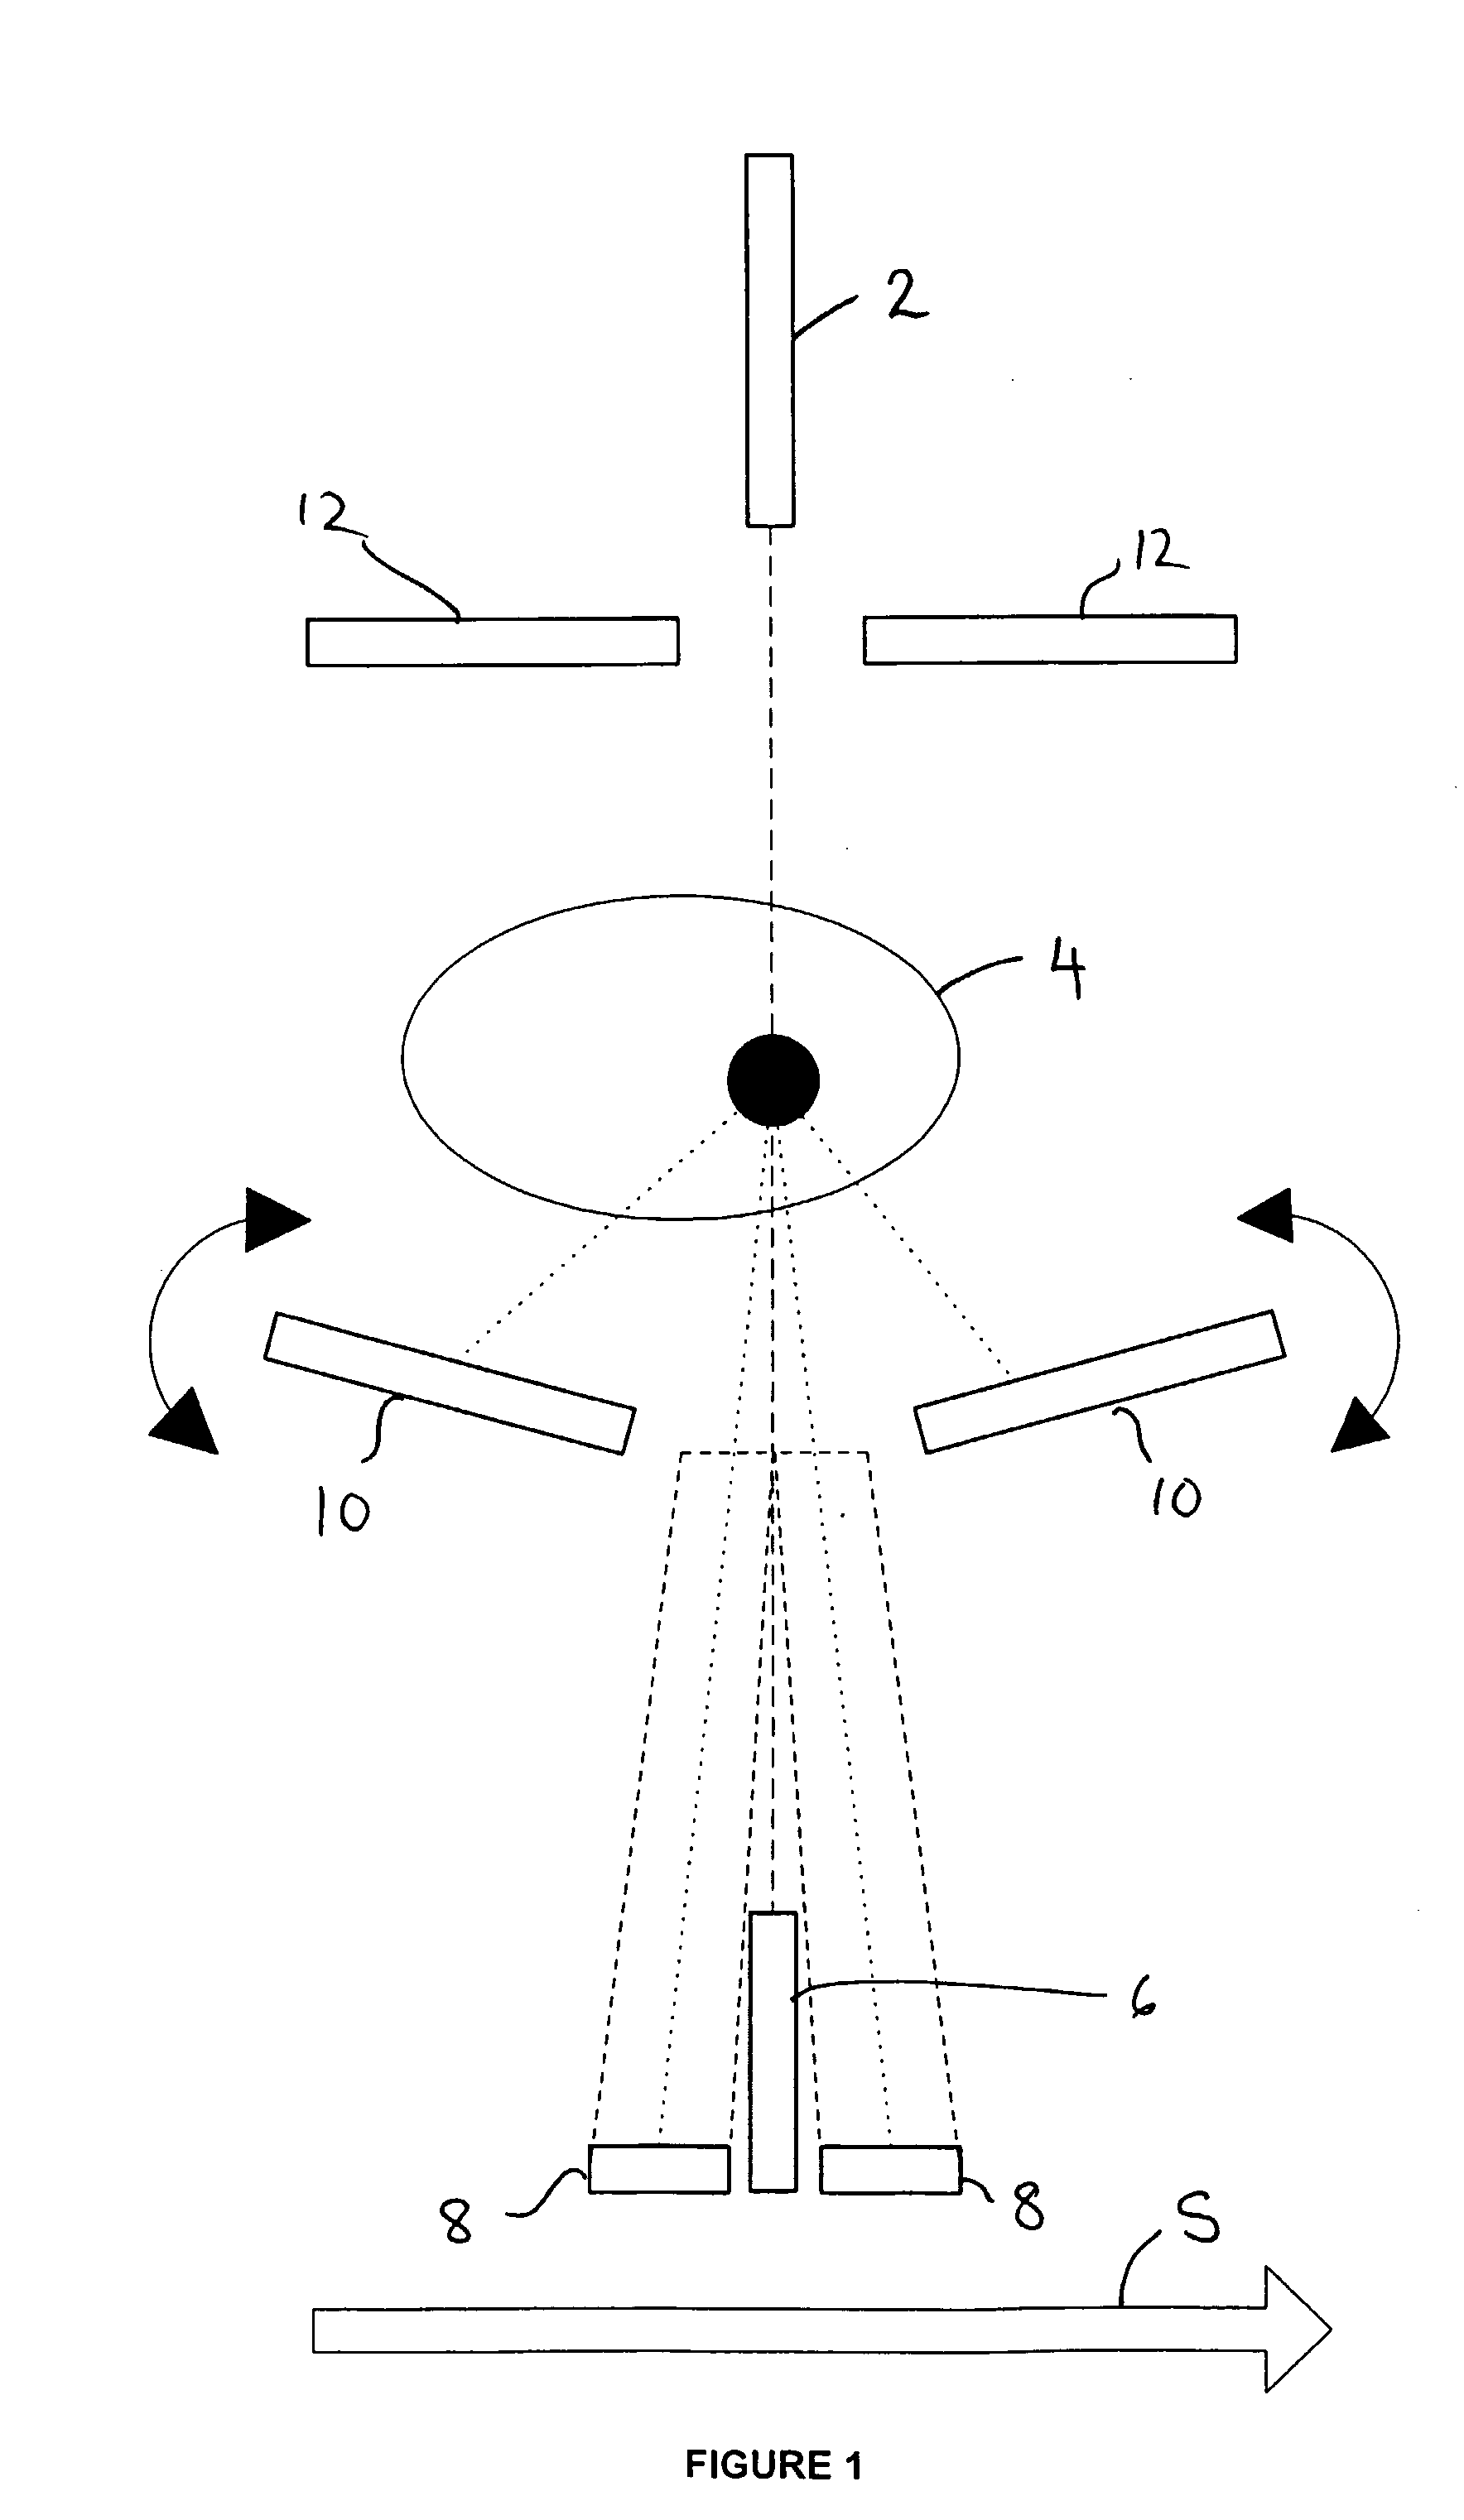 Method and Apparatus for Irradiating Body Tissue